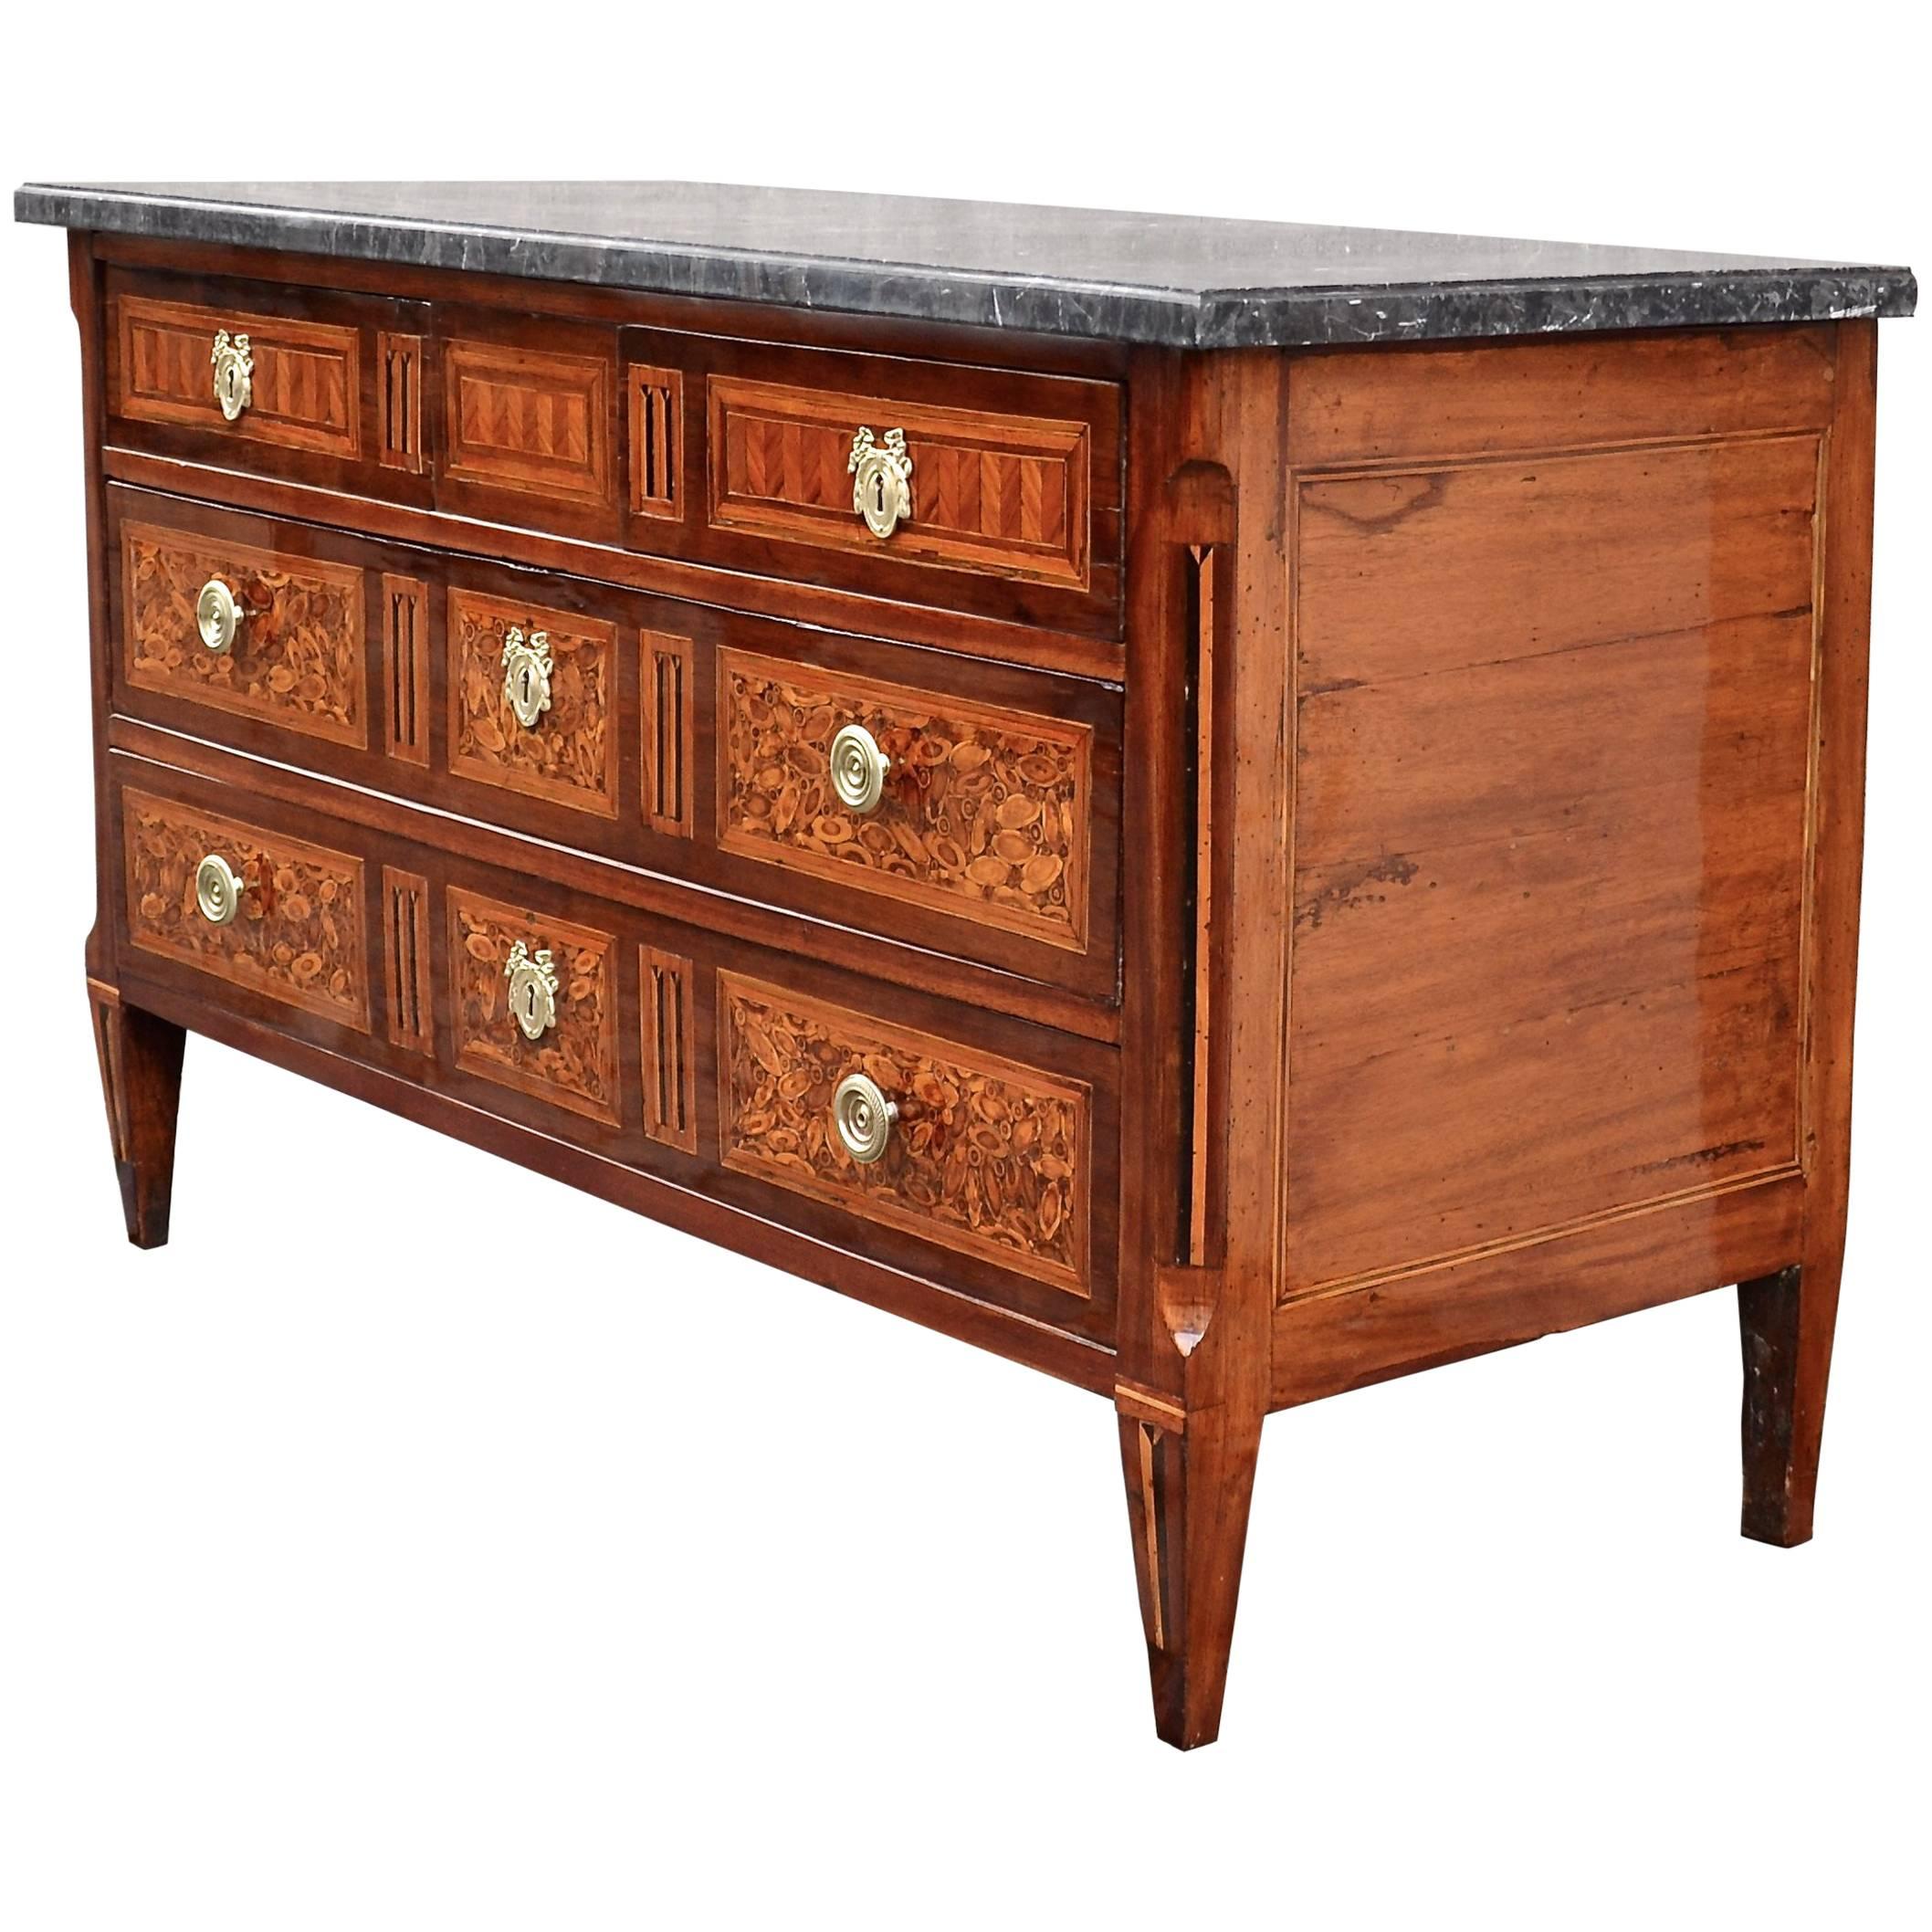 18th C. French Marquetry Chest Of Drawers, Stamped J. Chastel